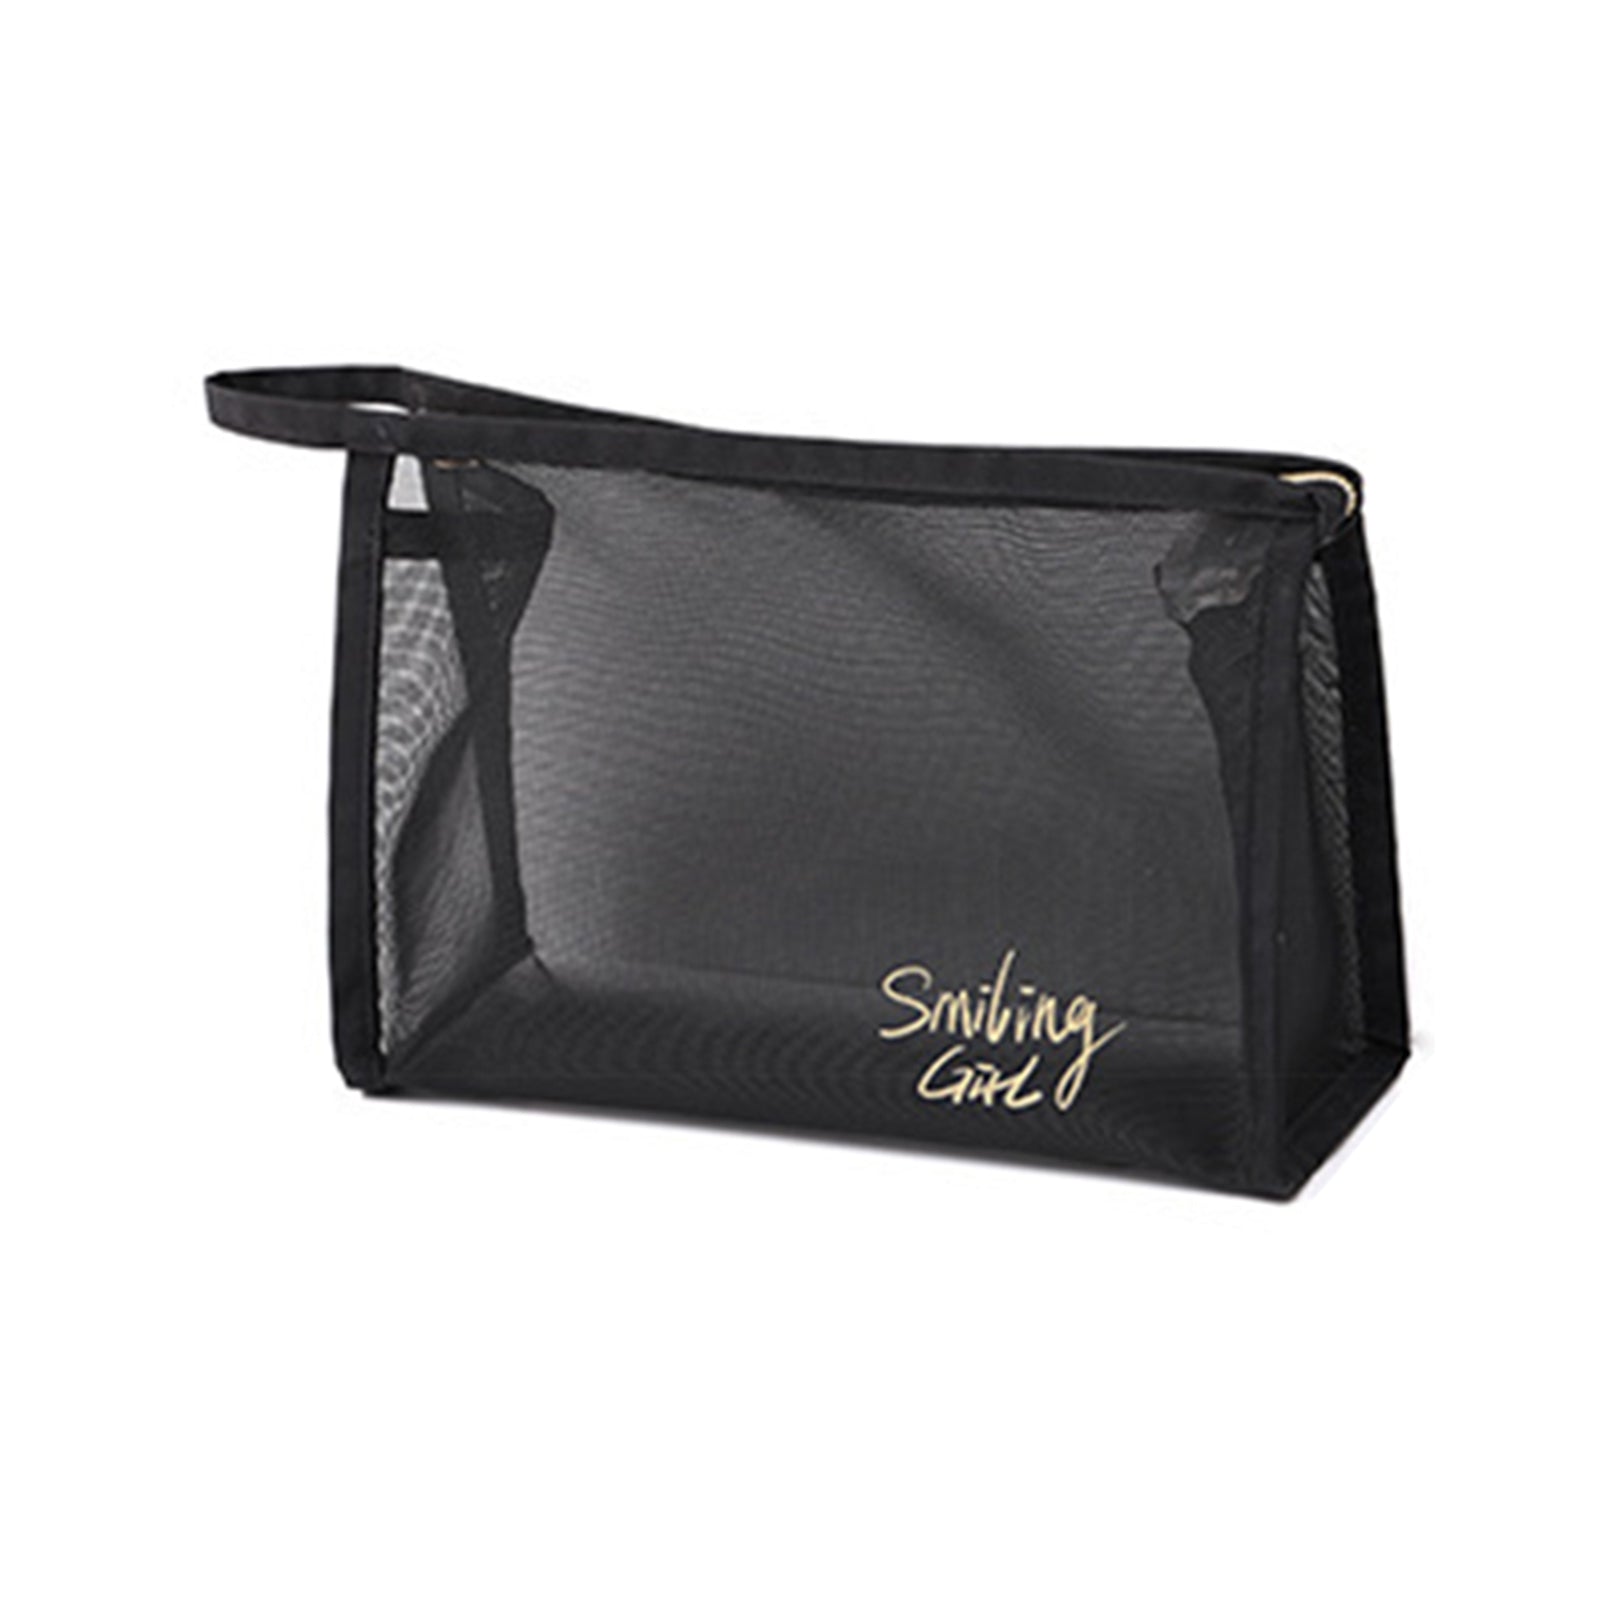 **(NET)**Cosmetic Bag Transparent Mesh Easy to Carry Zipper Black Convenient Storage Polyester  Toiletry Bag for Travel / KC22-227